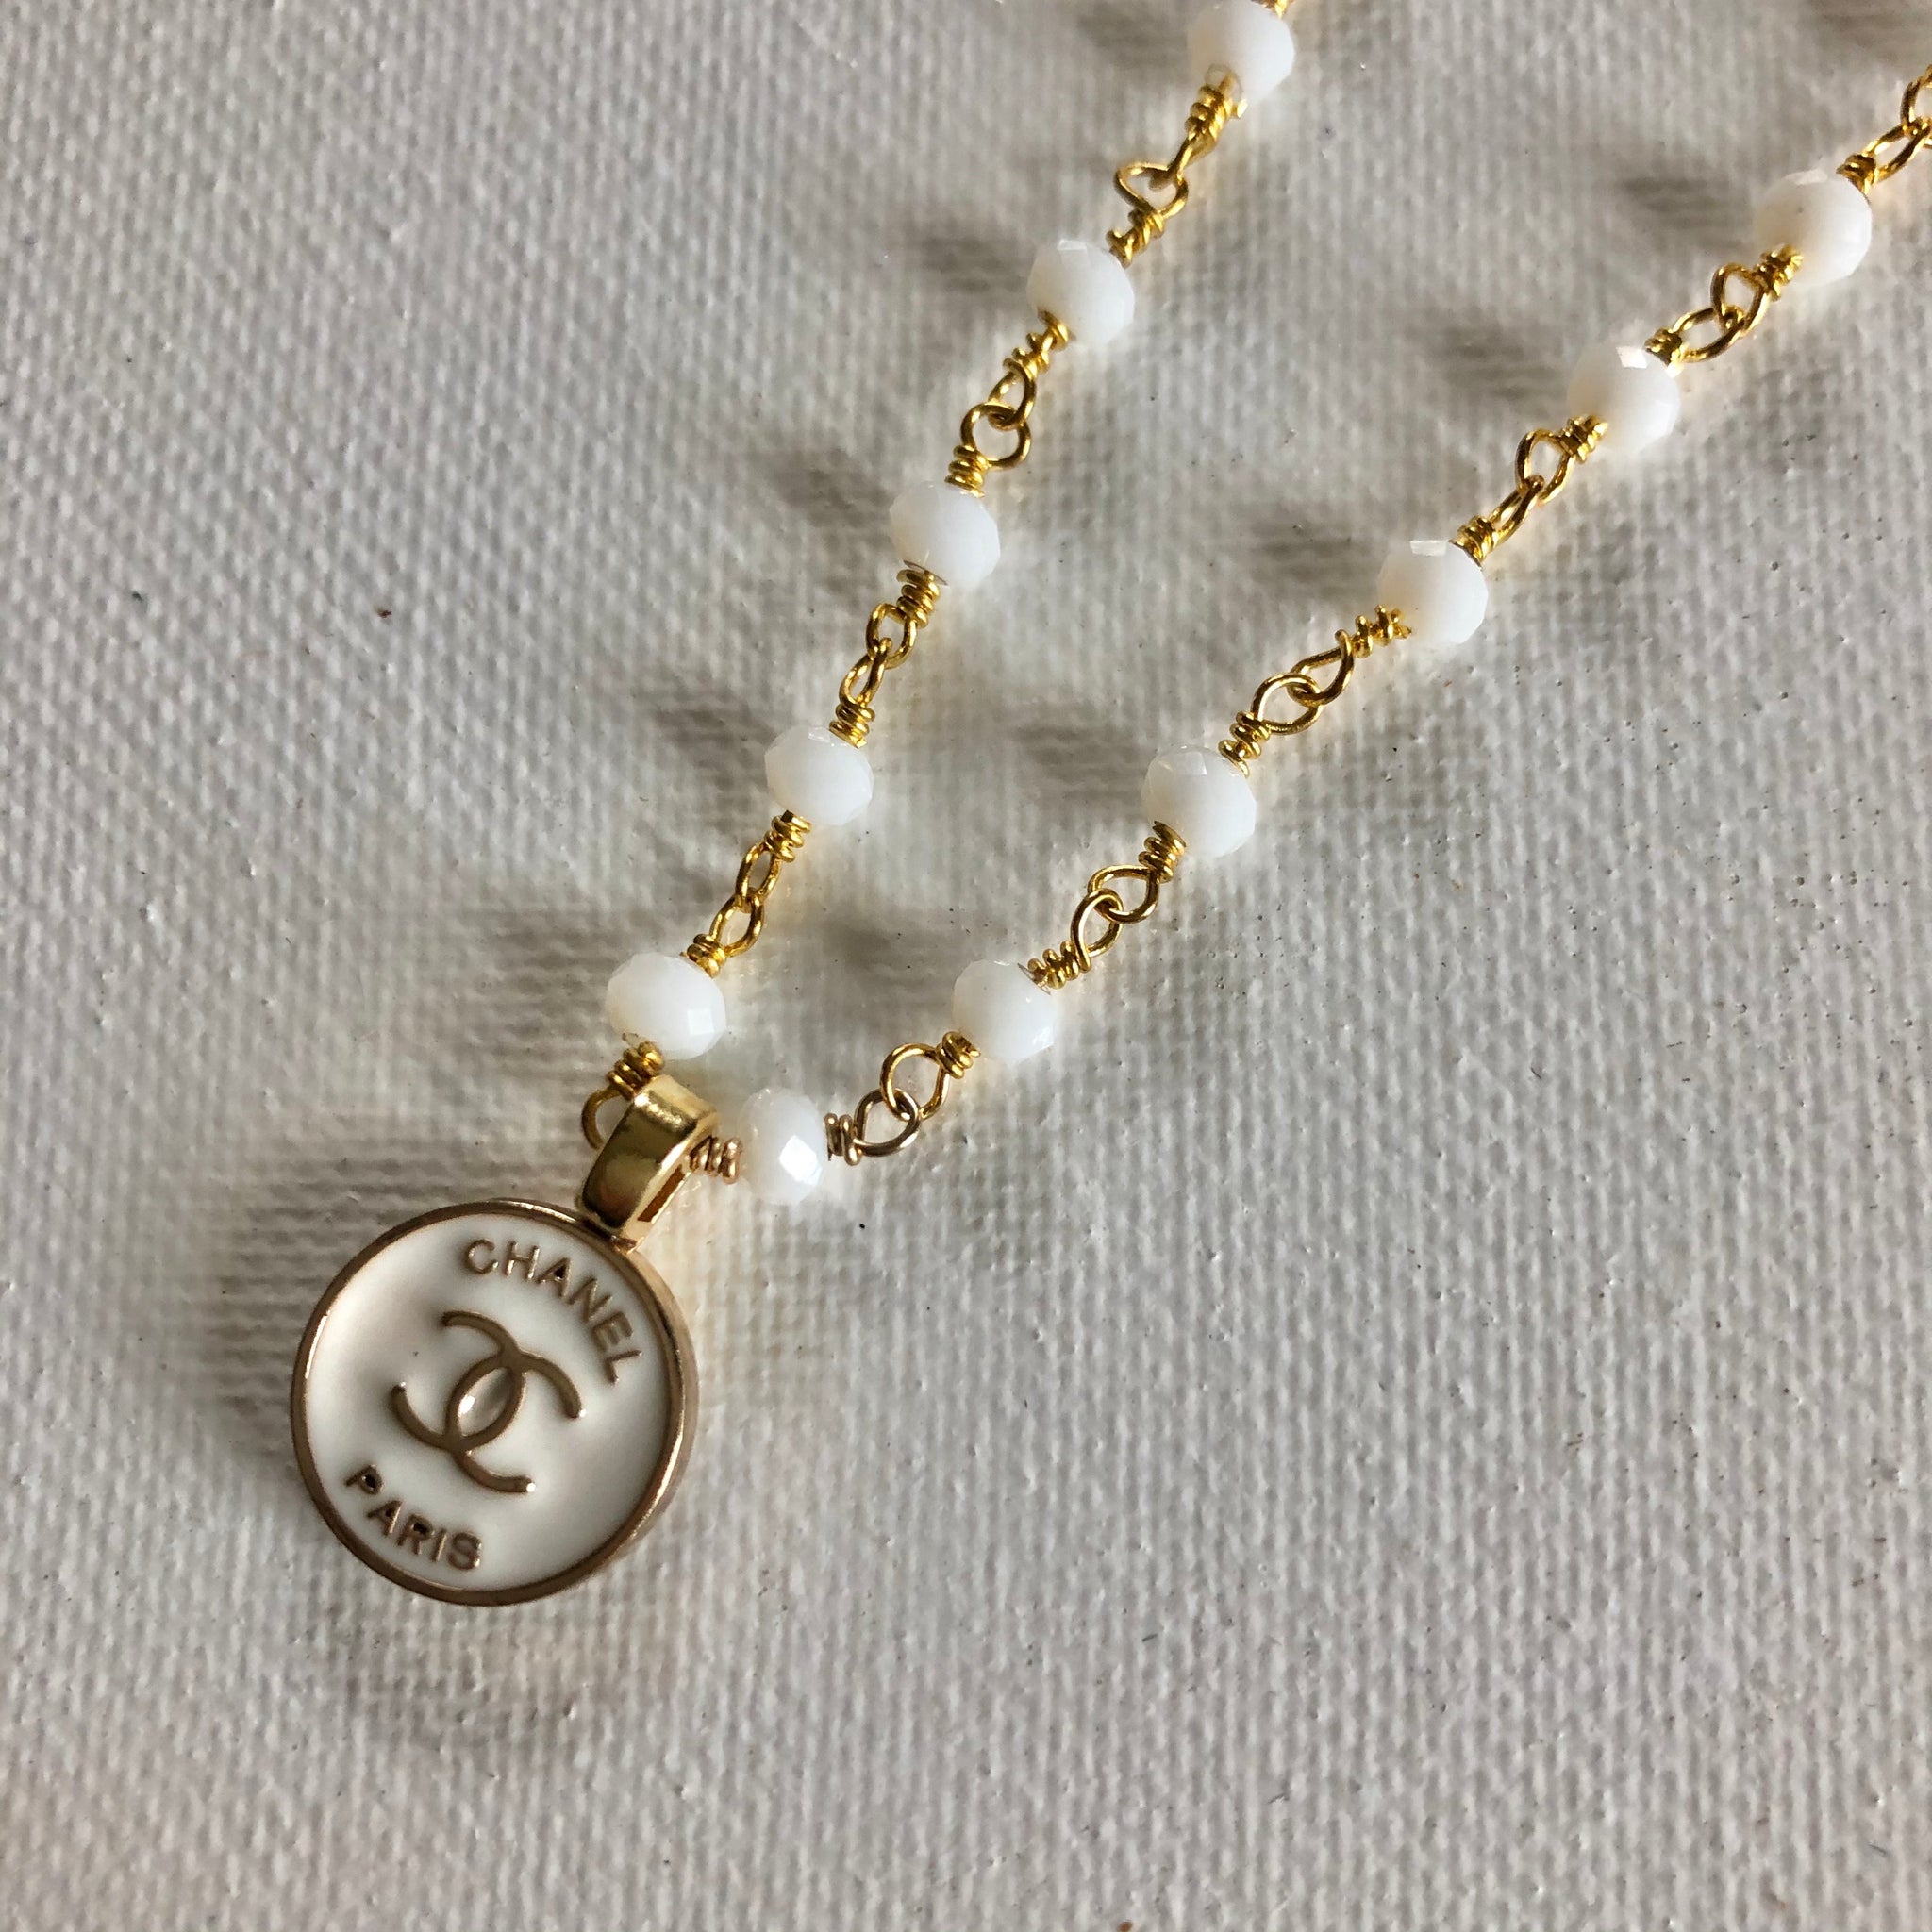 Tiny White CC Button Necklace - Gold/White Stone Chain – Beauty